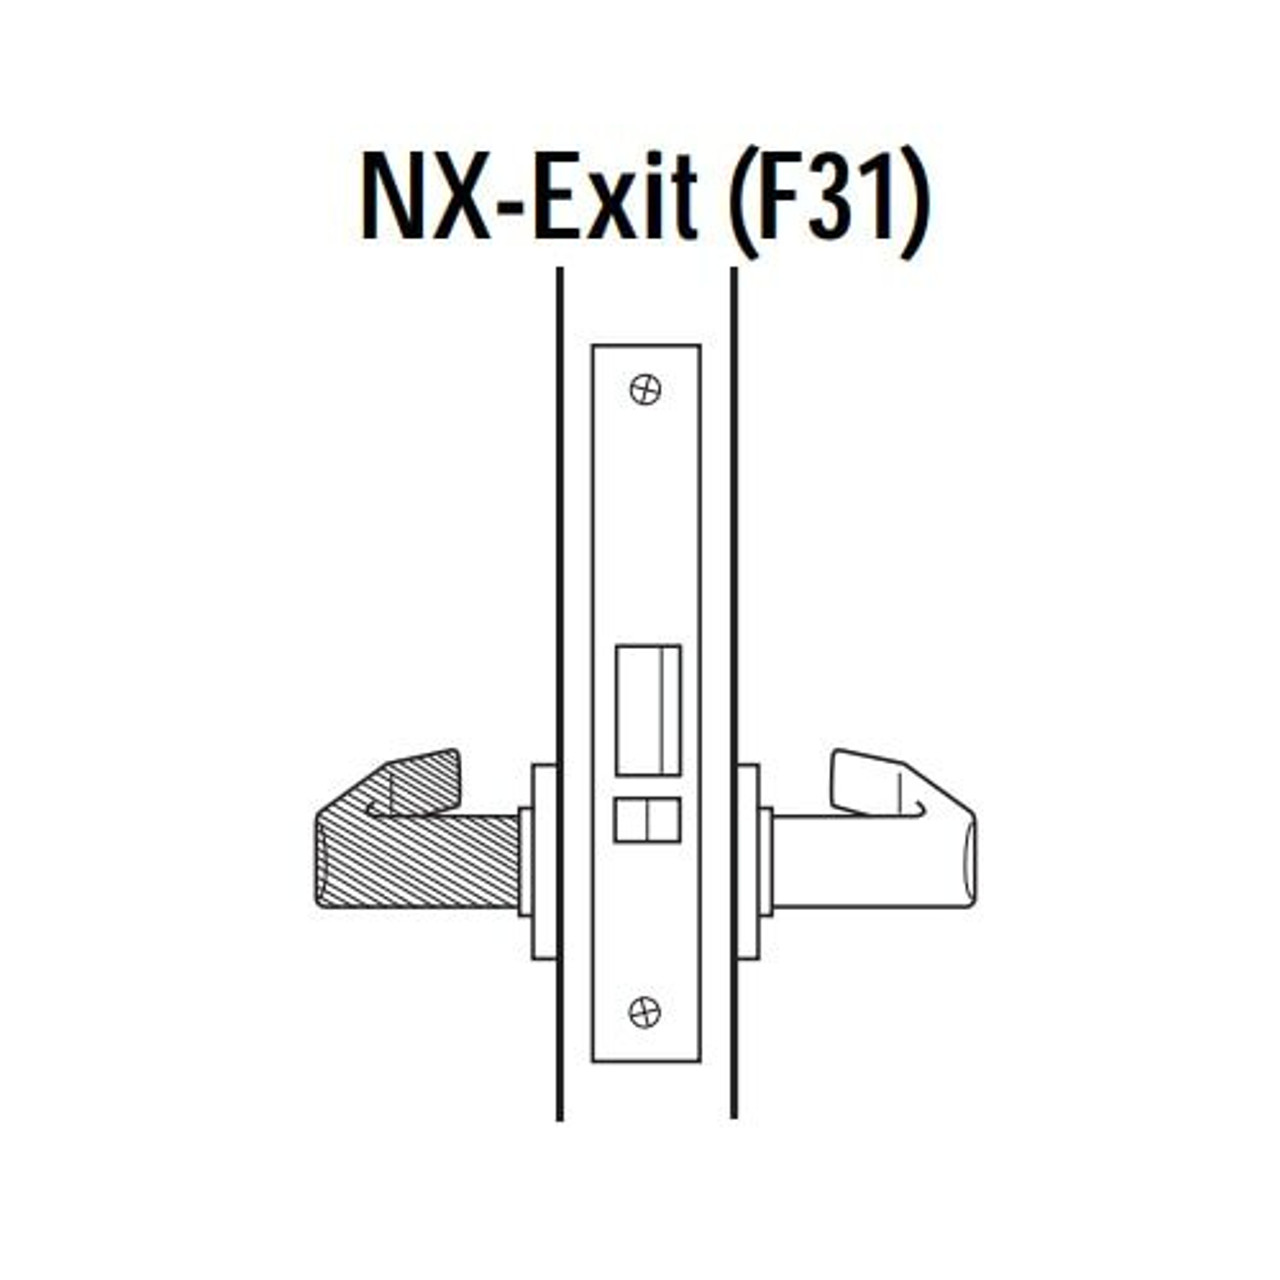 45H0NX15M605 Best 40H Series Exit Function Heavy Duty Mortise Lever Lock with Contour with Angle Return Style in Bright Brass